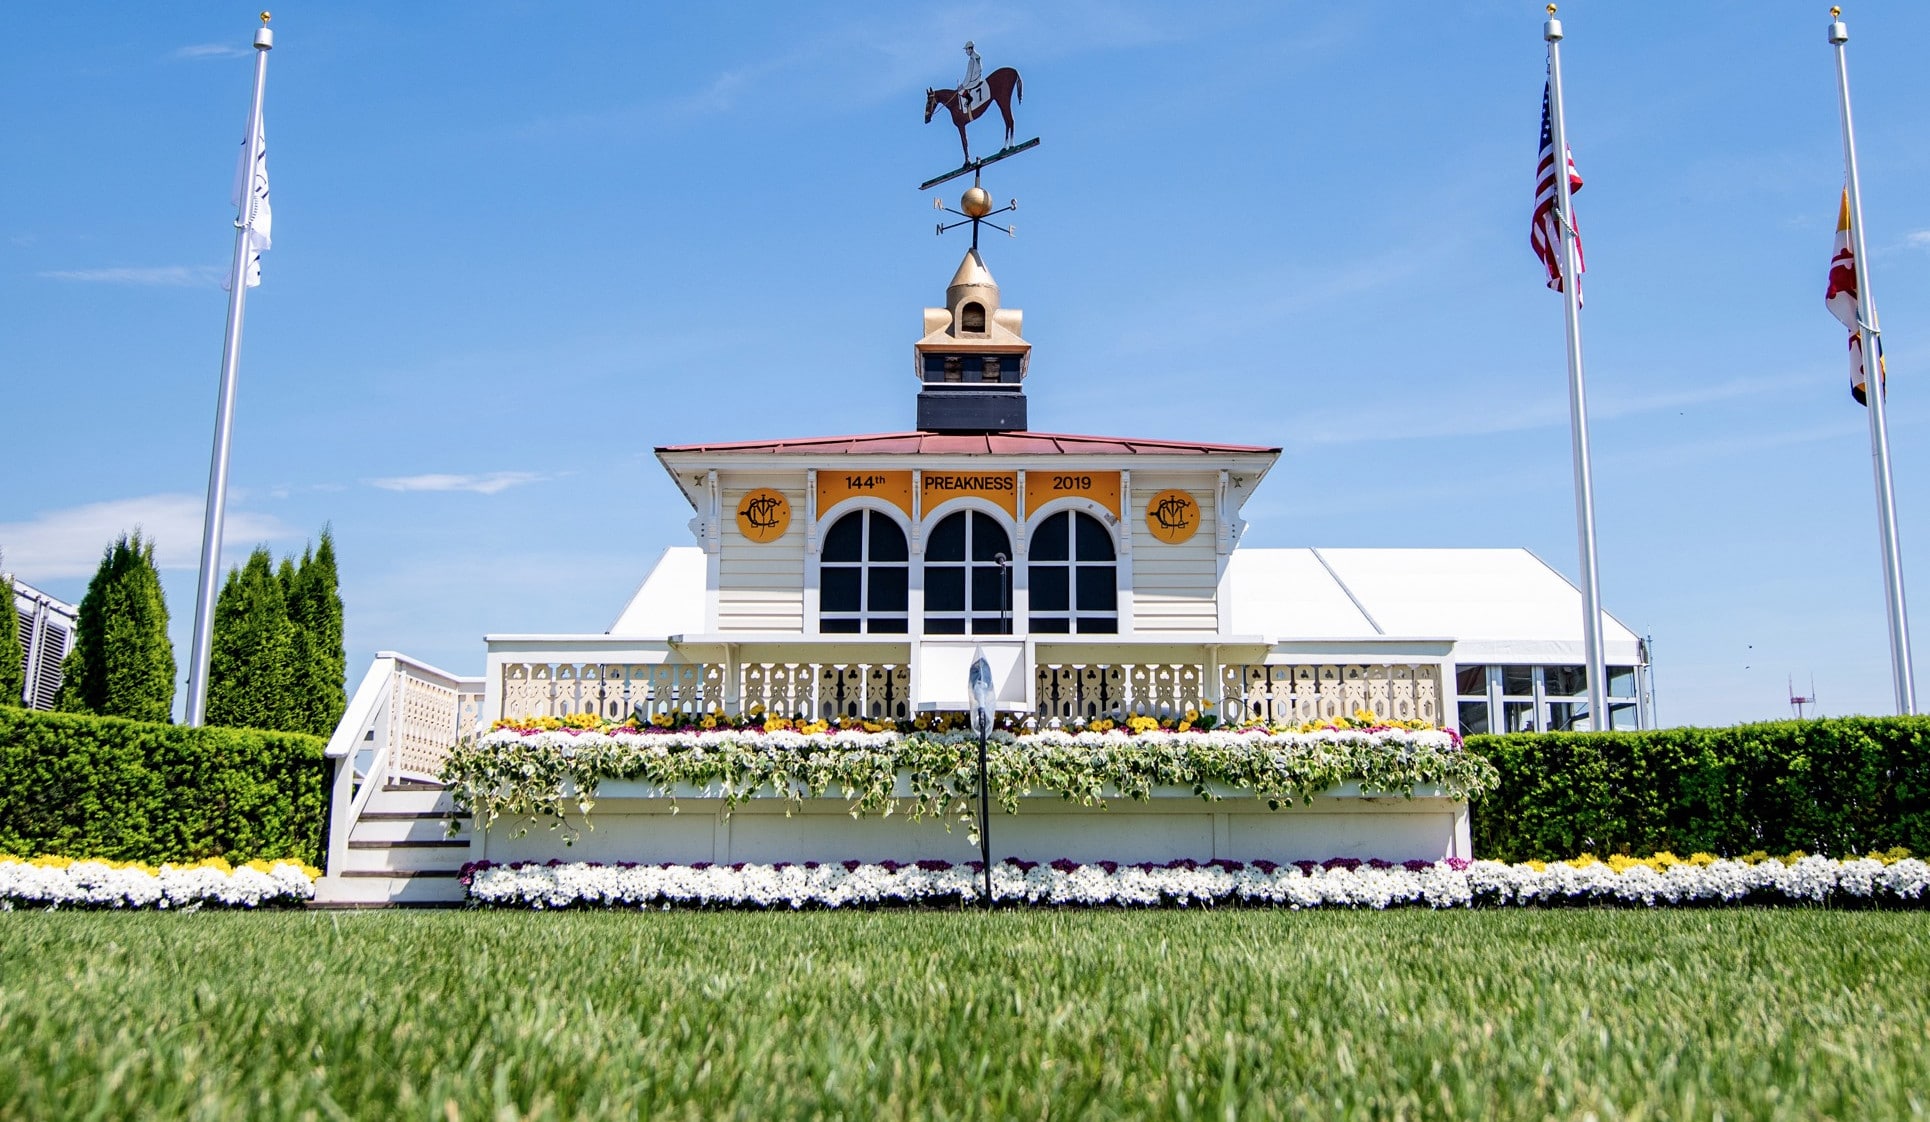 Preakness Weekend Features 16 Stakes at Pimlico